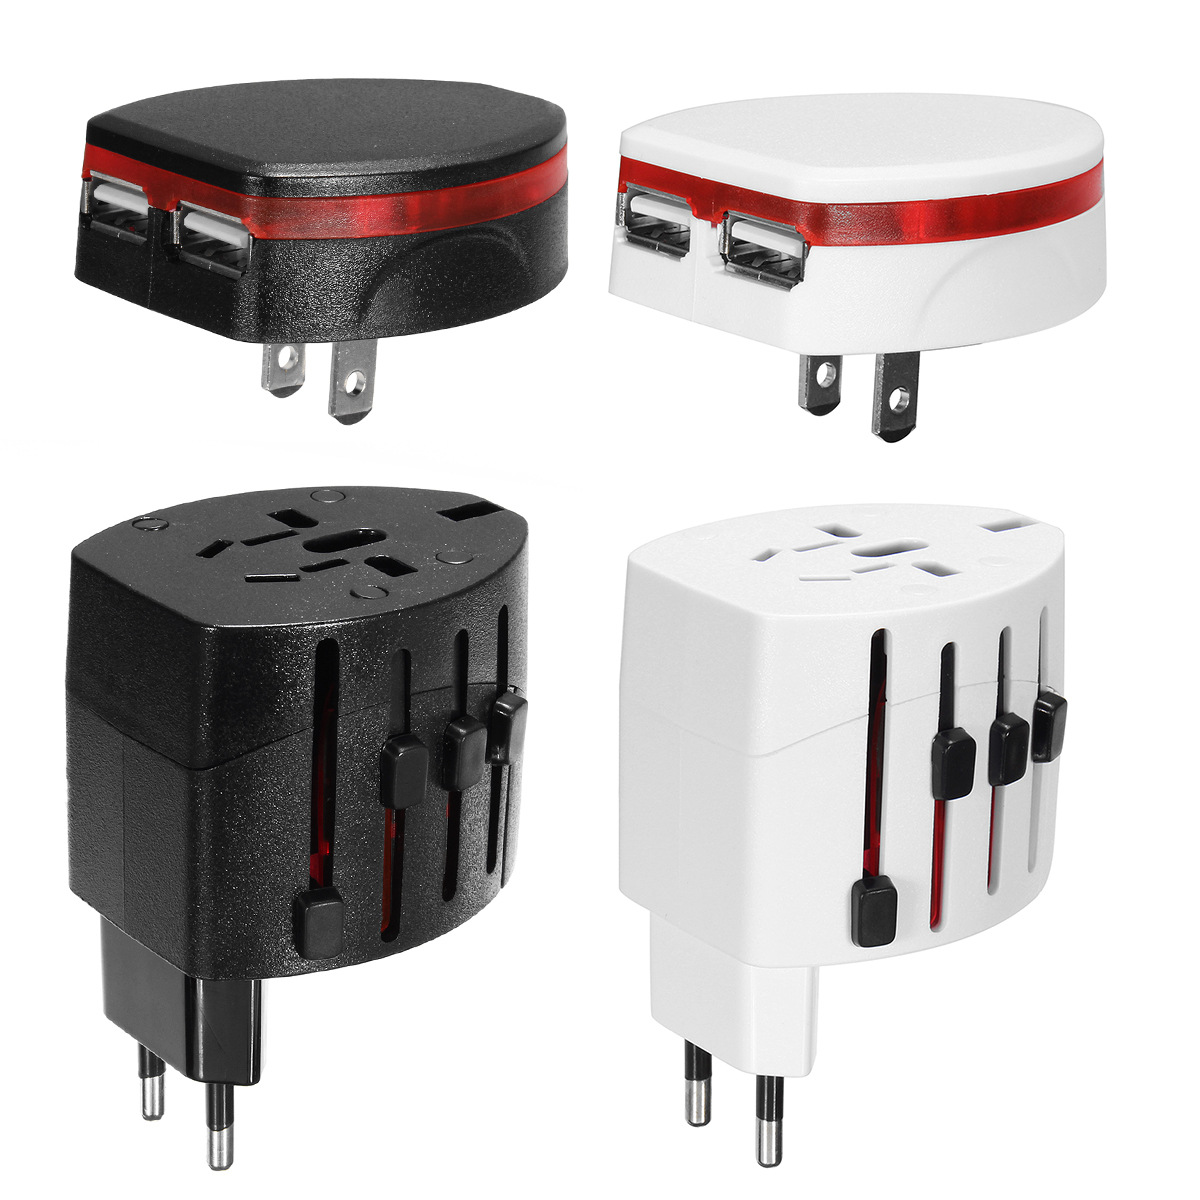 Where To Buy Travel Power Adapter